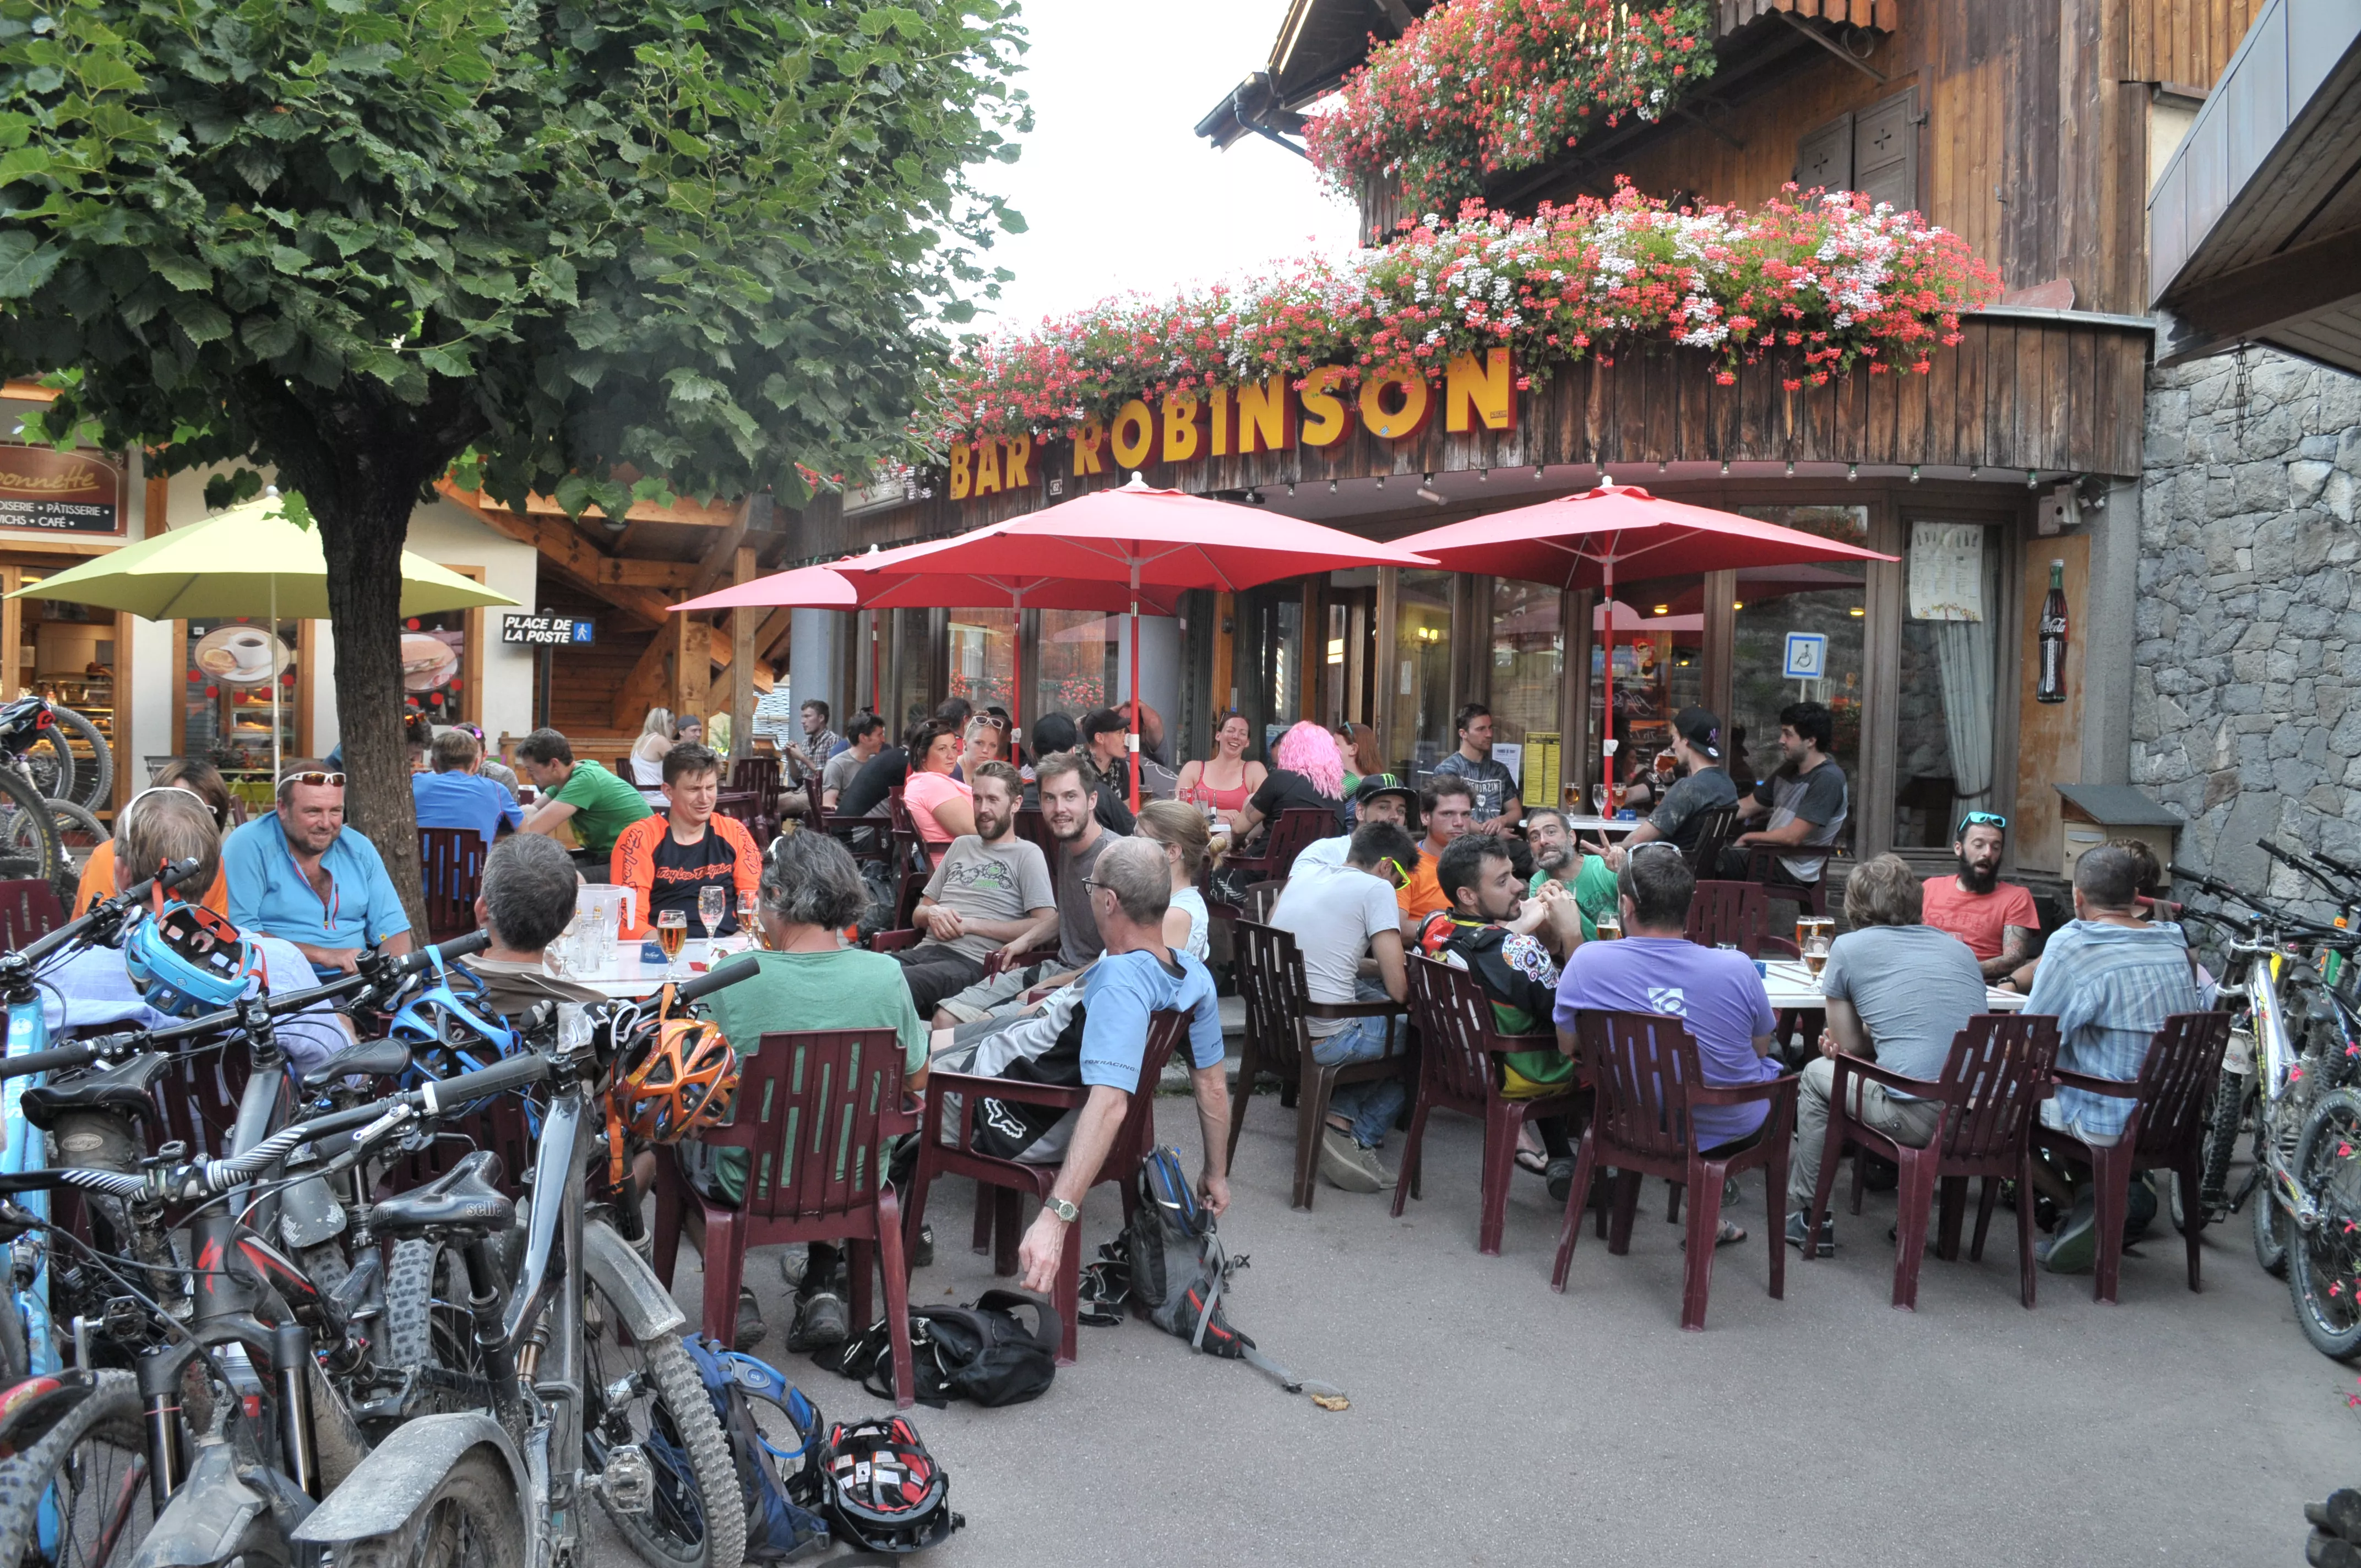 Bar Robinson in France, Europe | Bars - Rated 0.9